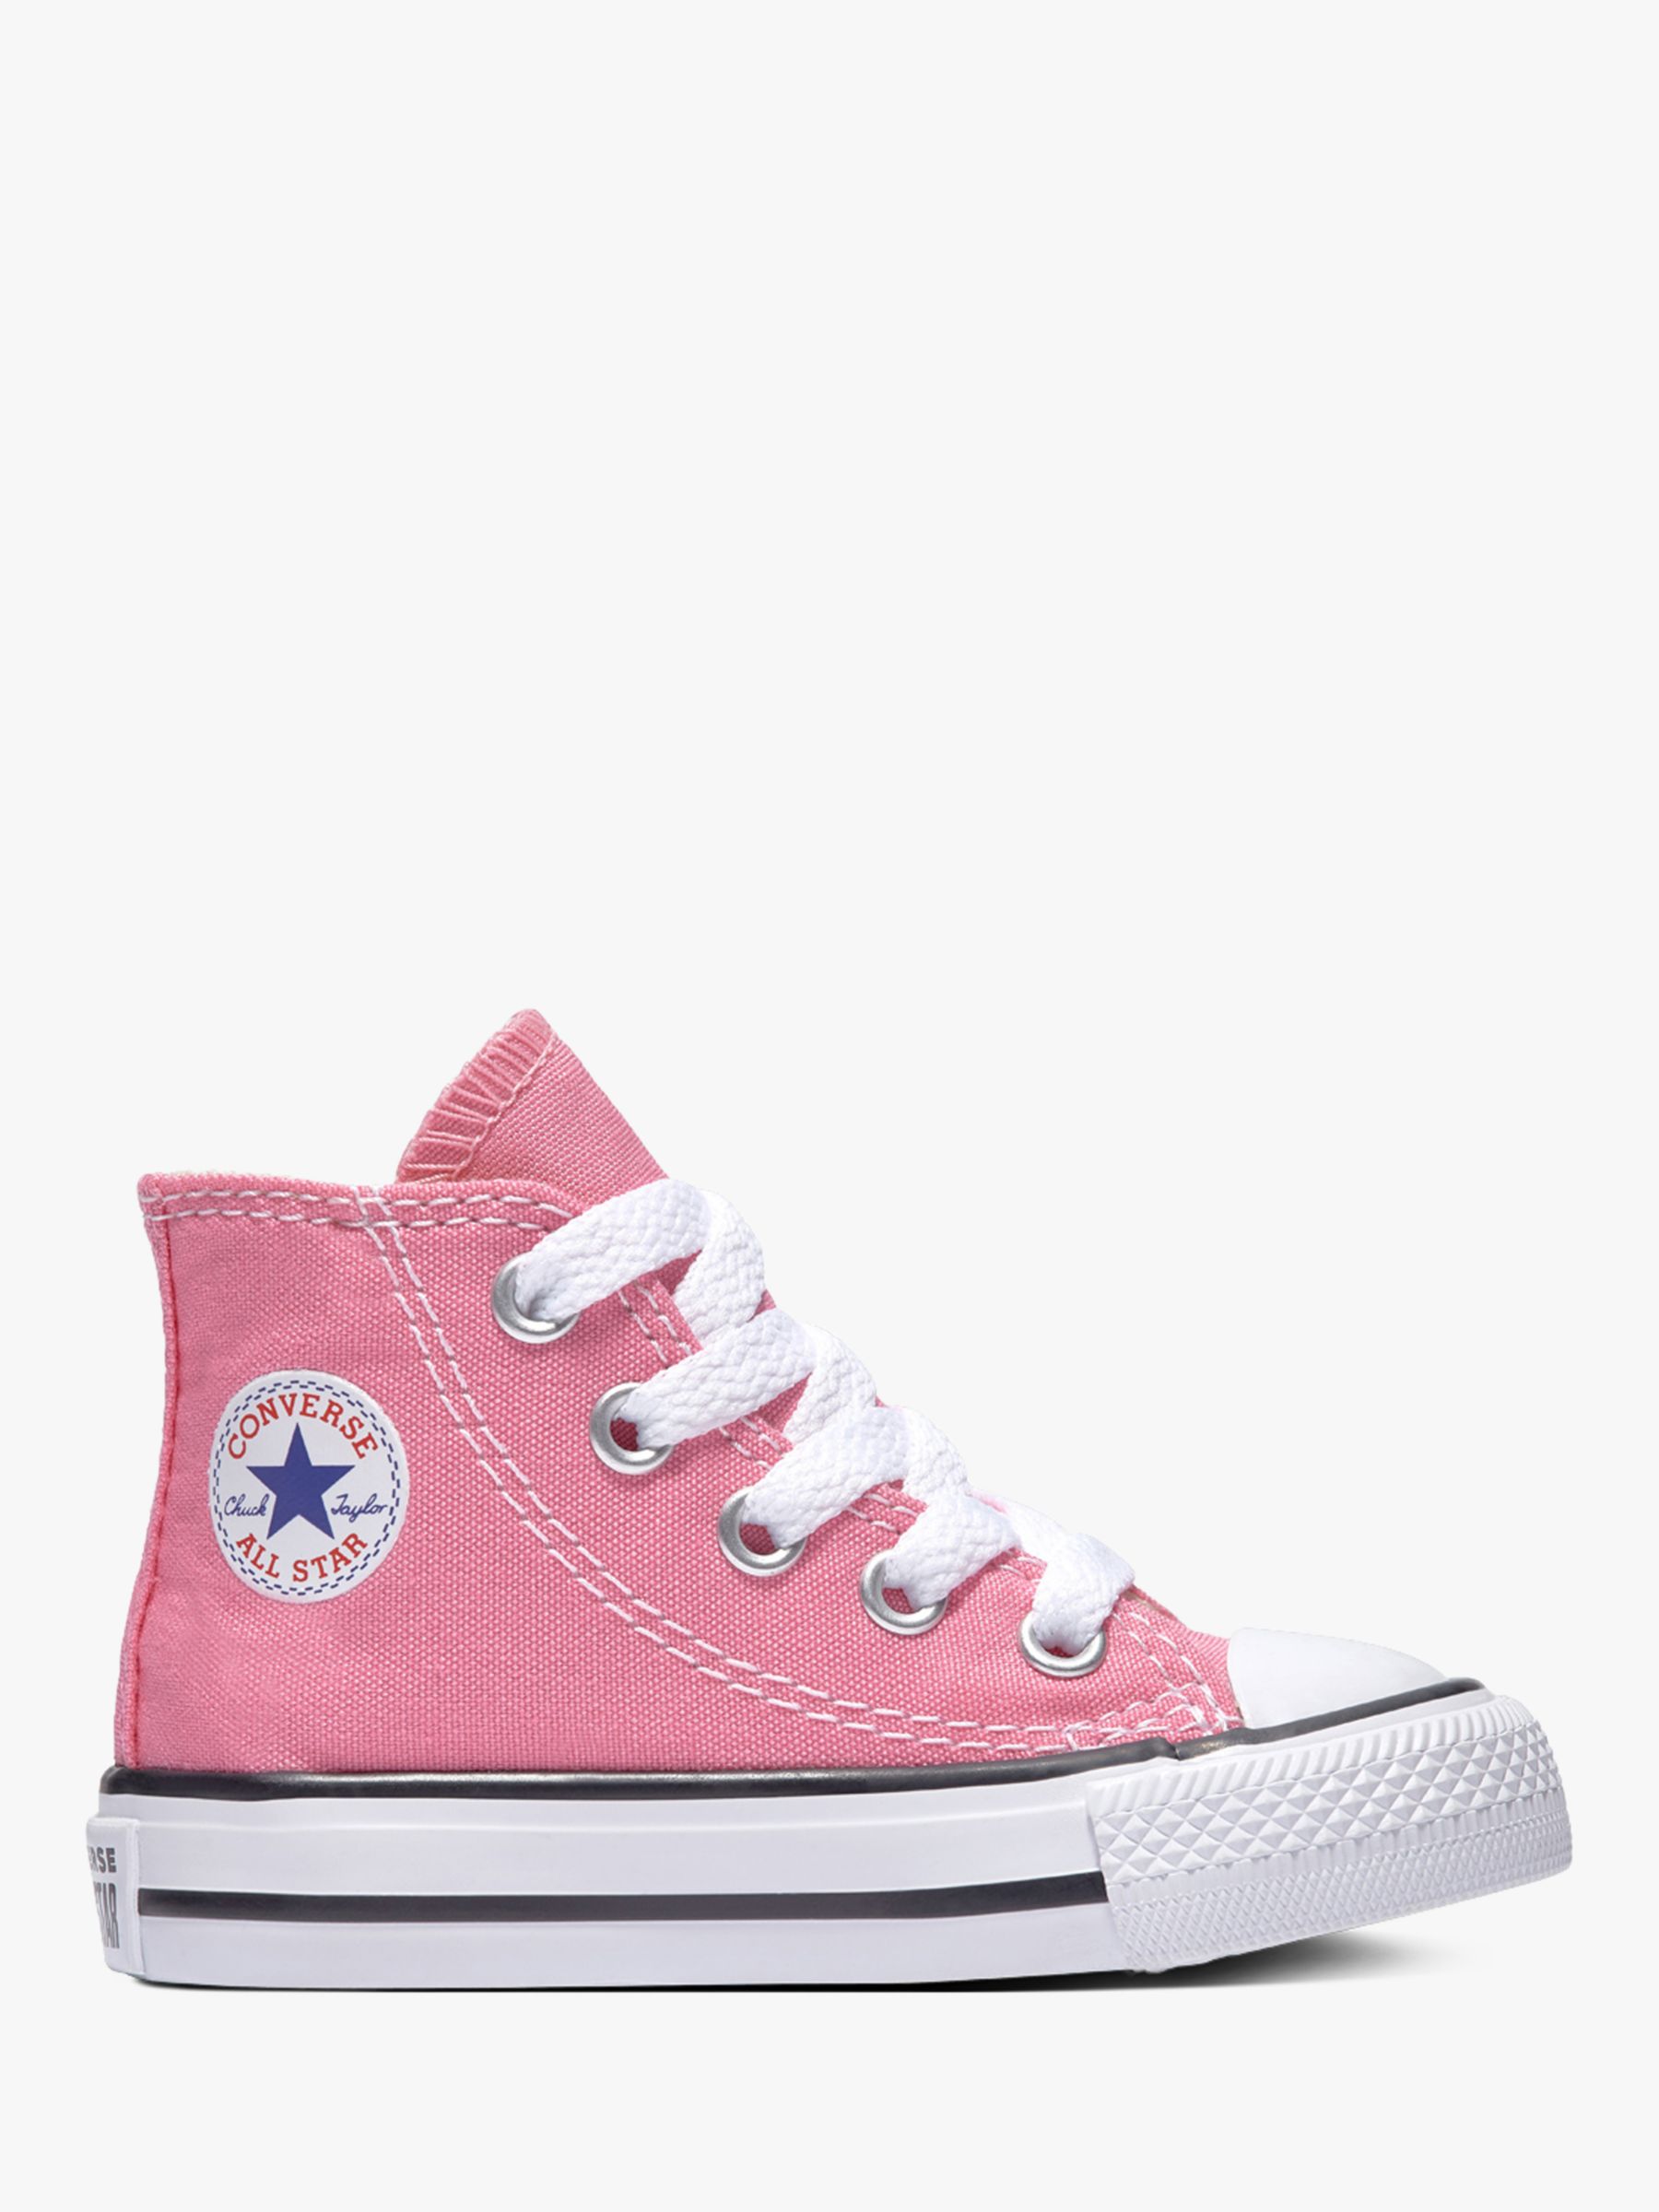 Converse All Star Core-Hi Trainers, Pink, Size 3 Adult